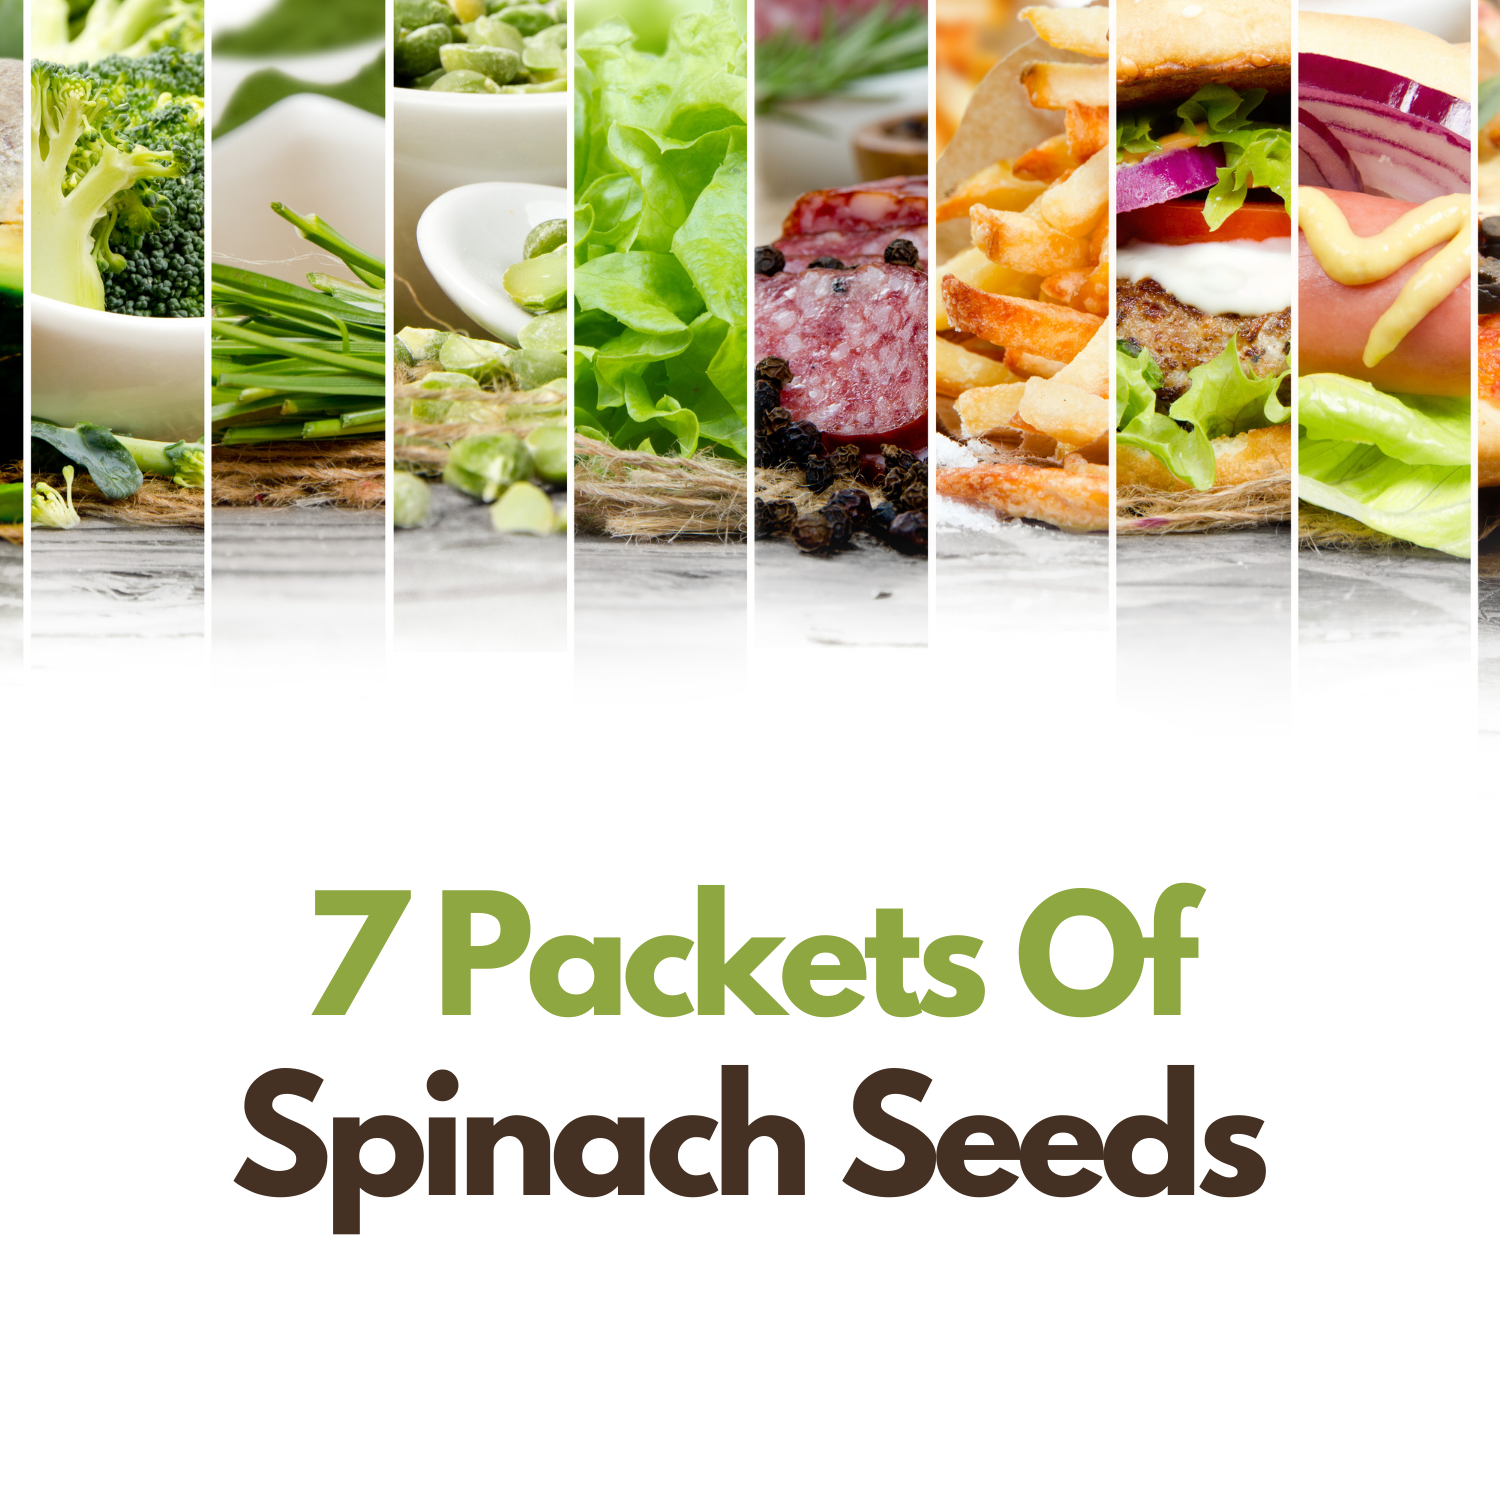 7 Packets Of Spinach Seeds